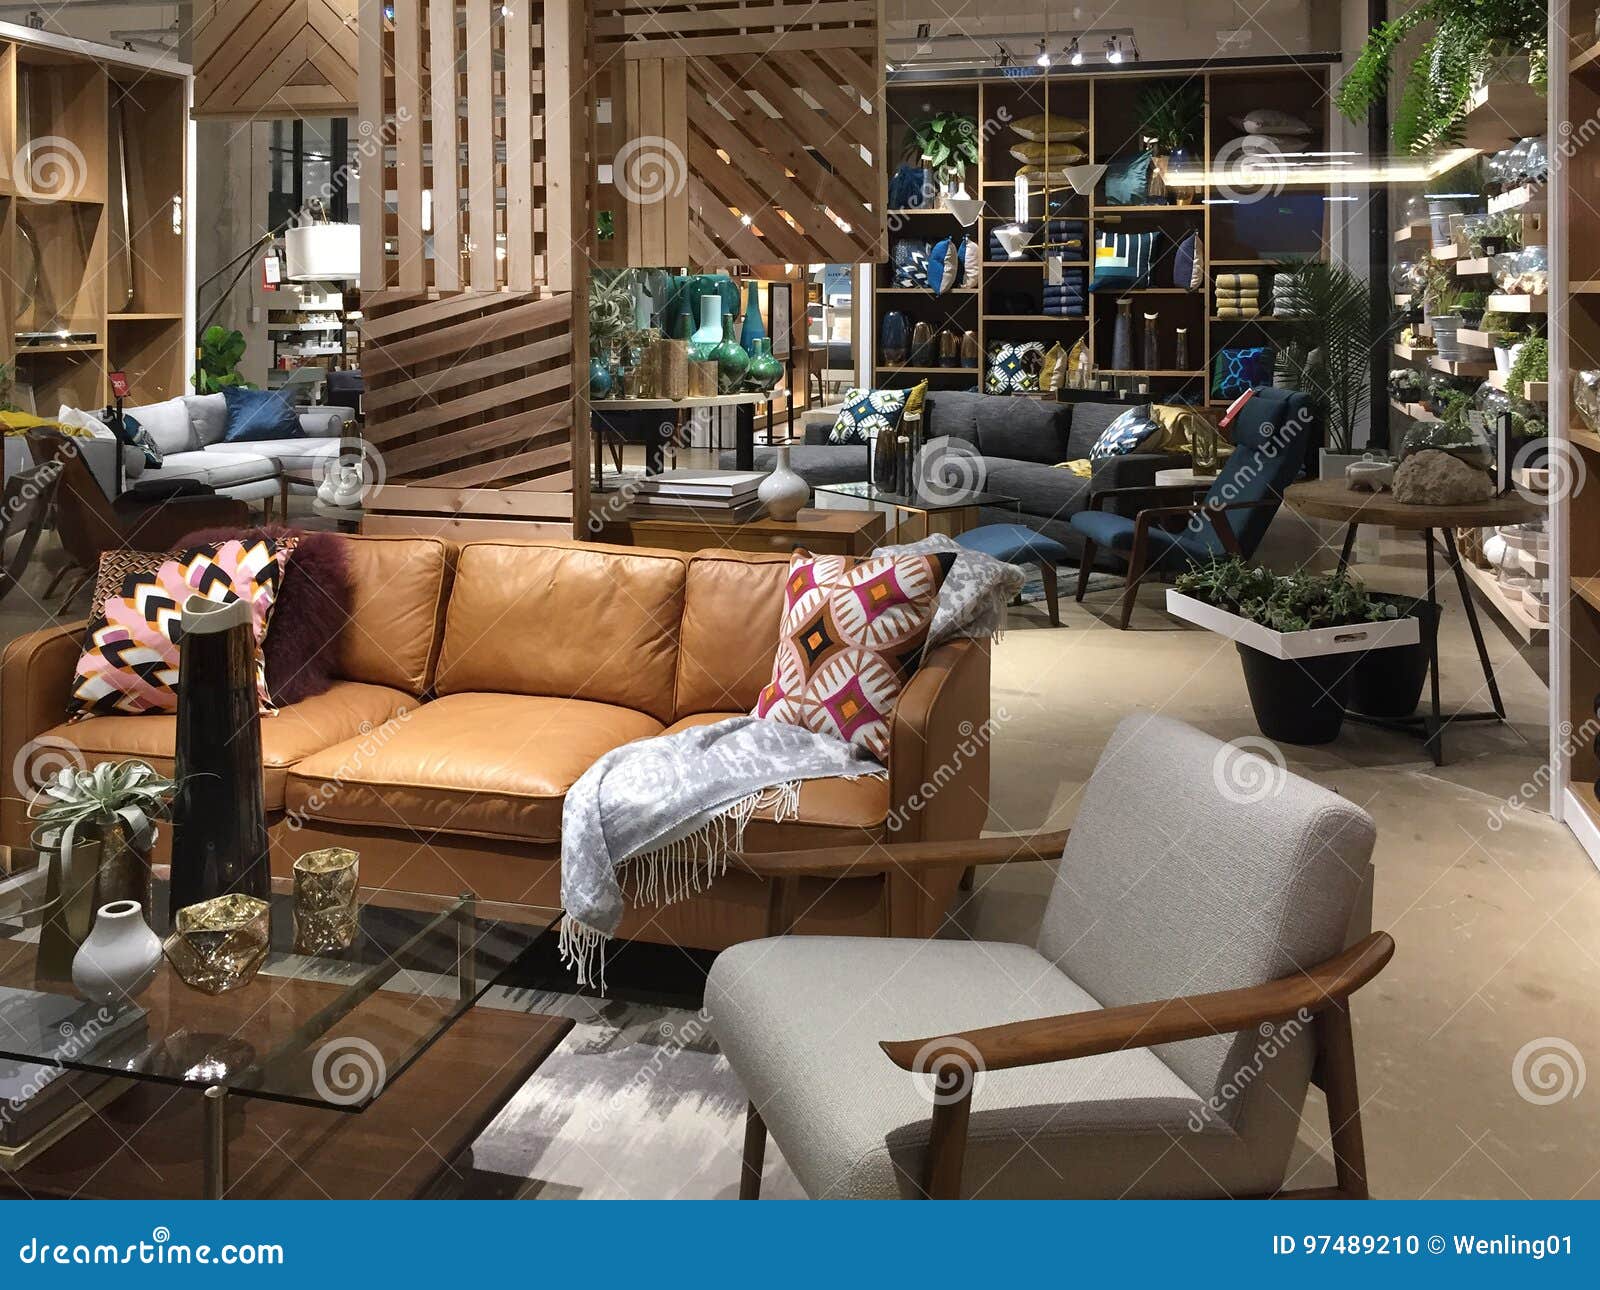 Discover Chic Furnishings at Modern Home Furniture Store